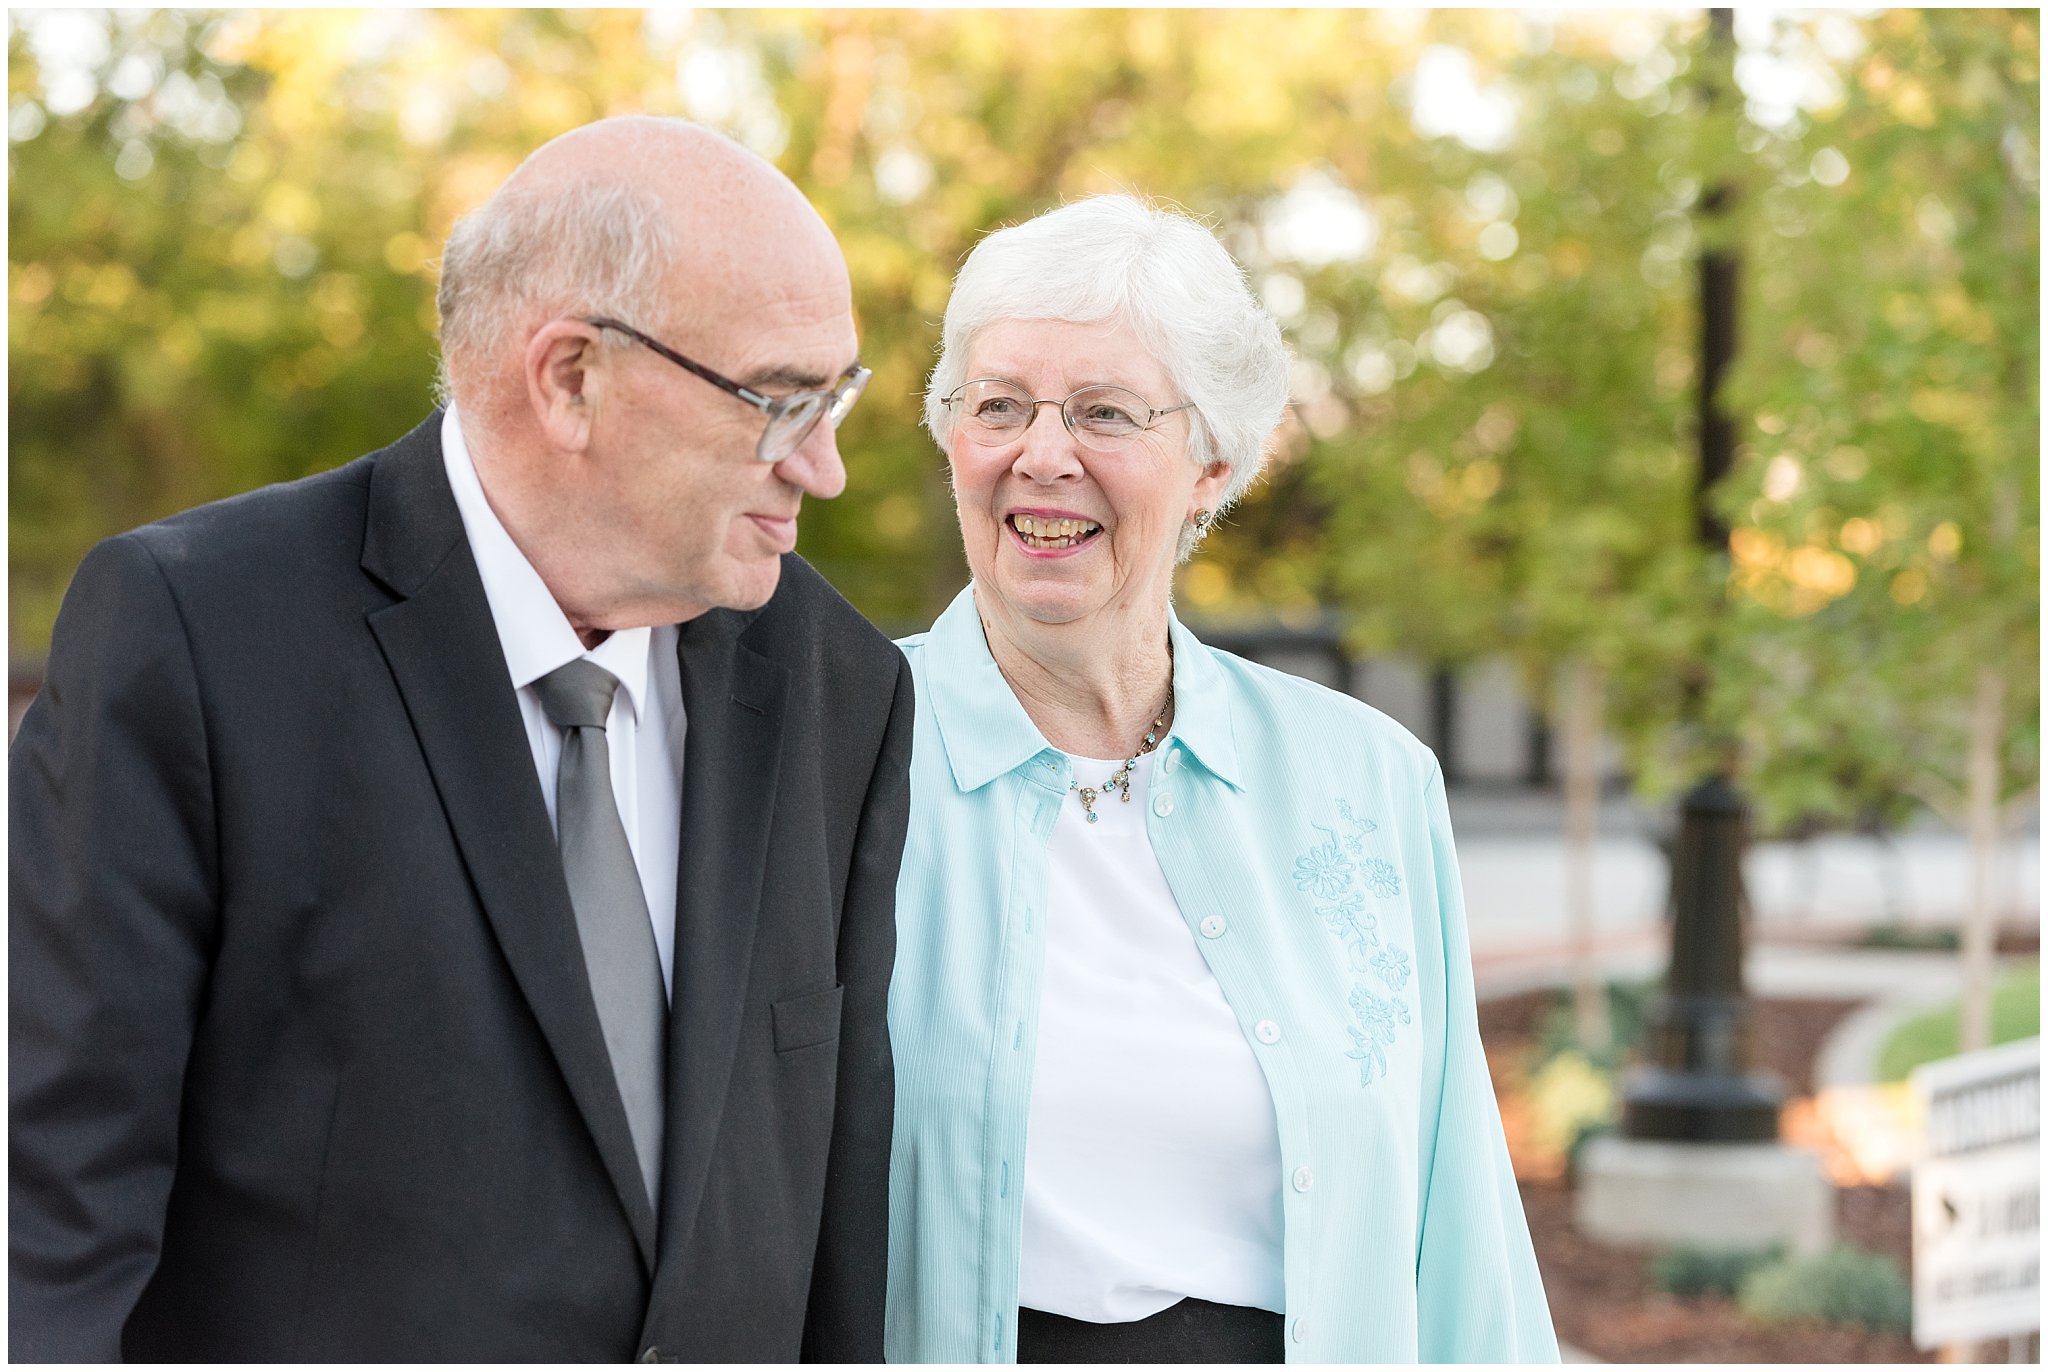 Older Couple walking and grandma laughing | Layton Commons Park | Layton Couples Photographer | Jessie and Dallin